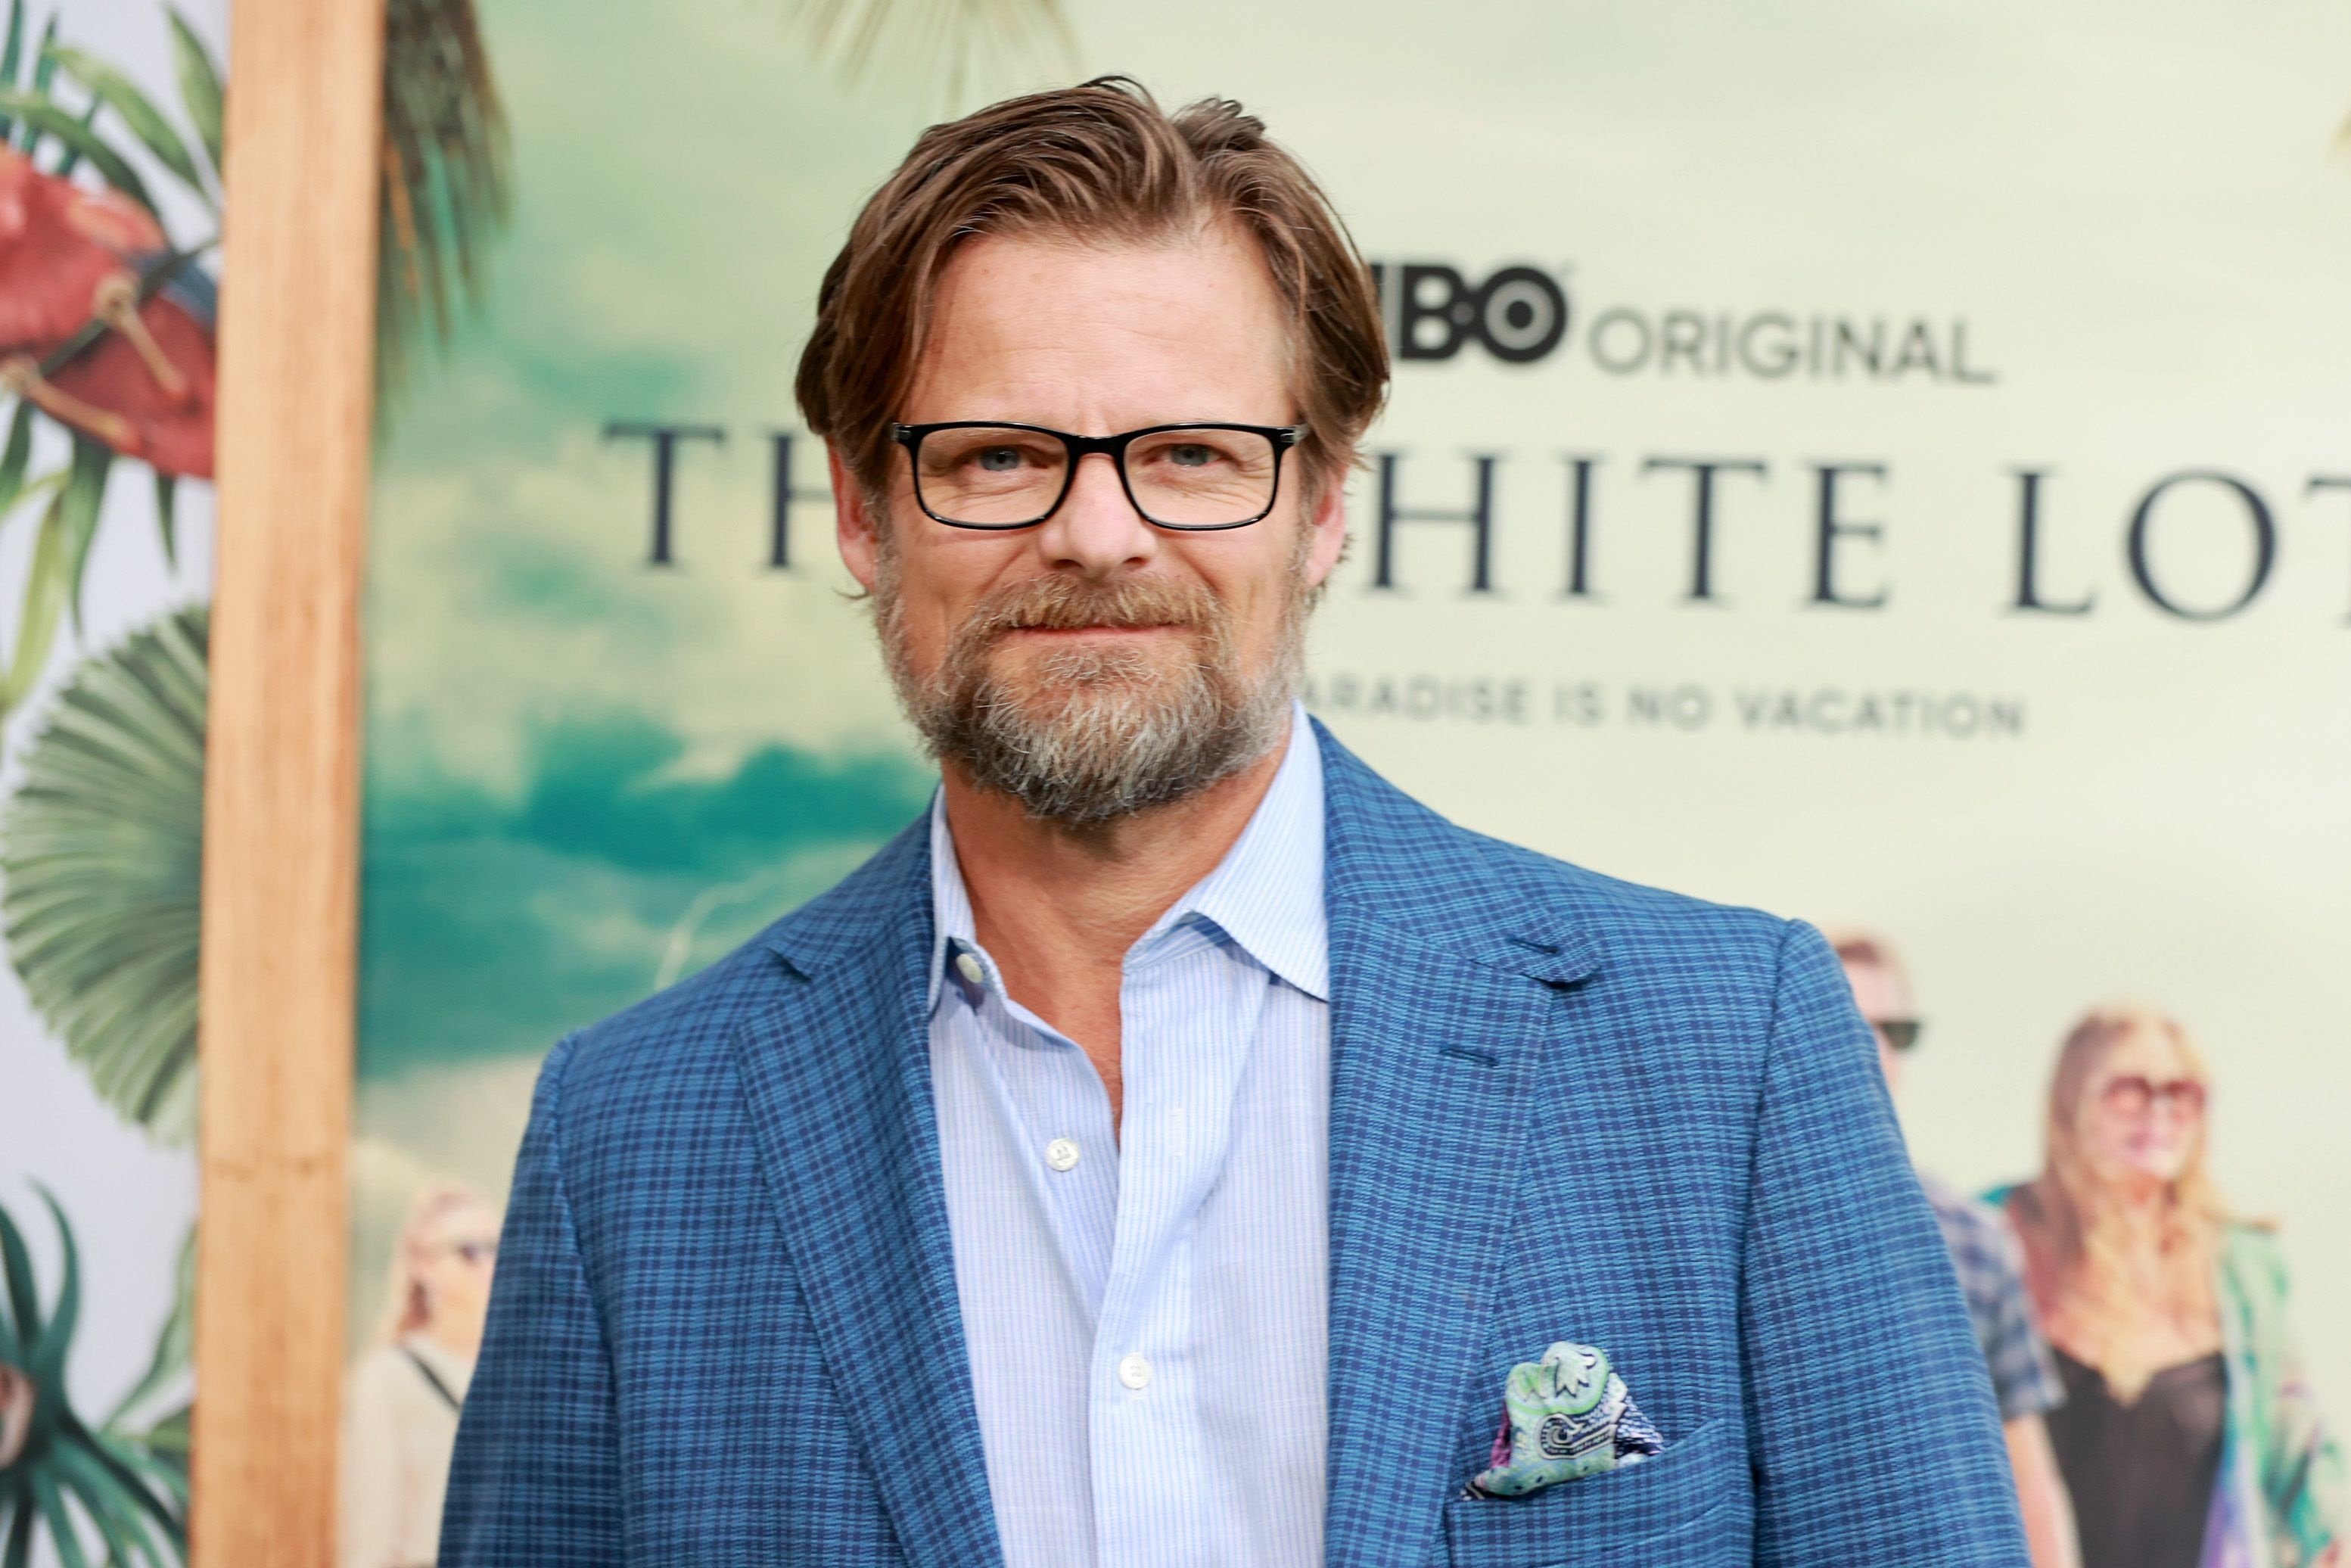 Steve Zahn poses for photographers at HBOs The White Lotus premiere in Los Angeles